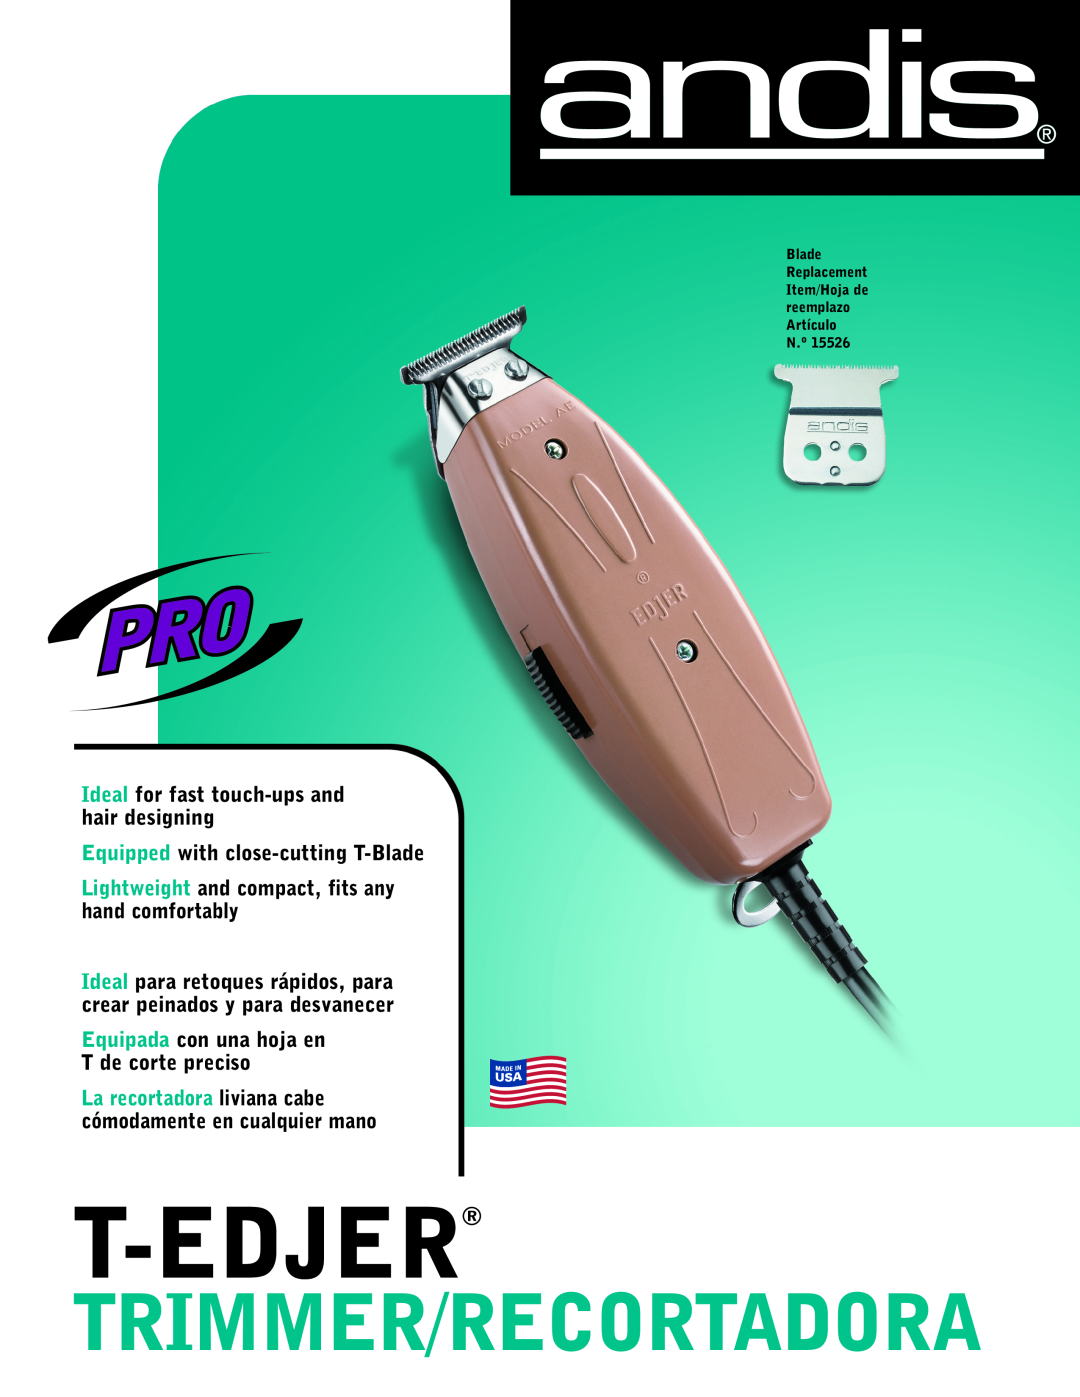 Andis Company AEE manual t-edjER, Trimmer/Recortadora, Ideal for fast touch-upsand hair designing 